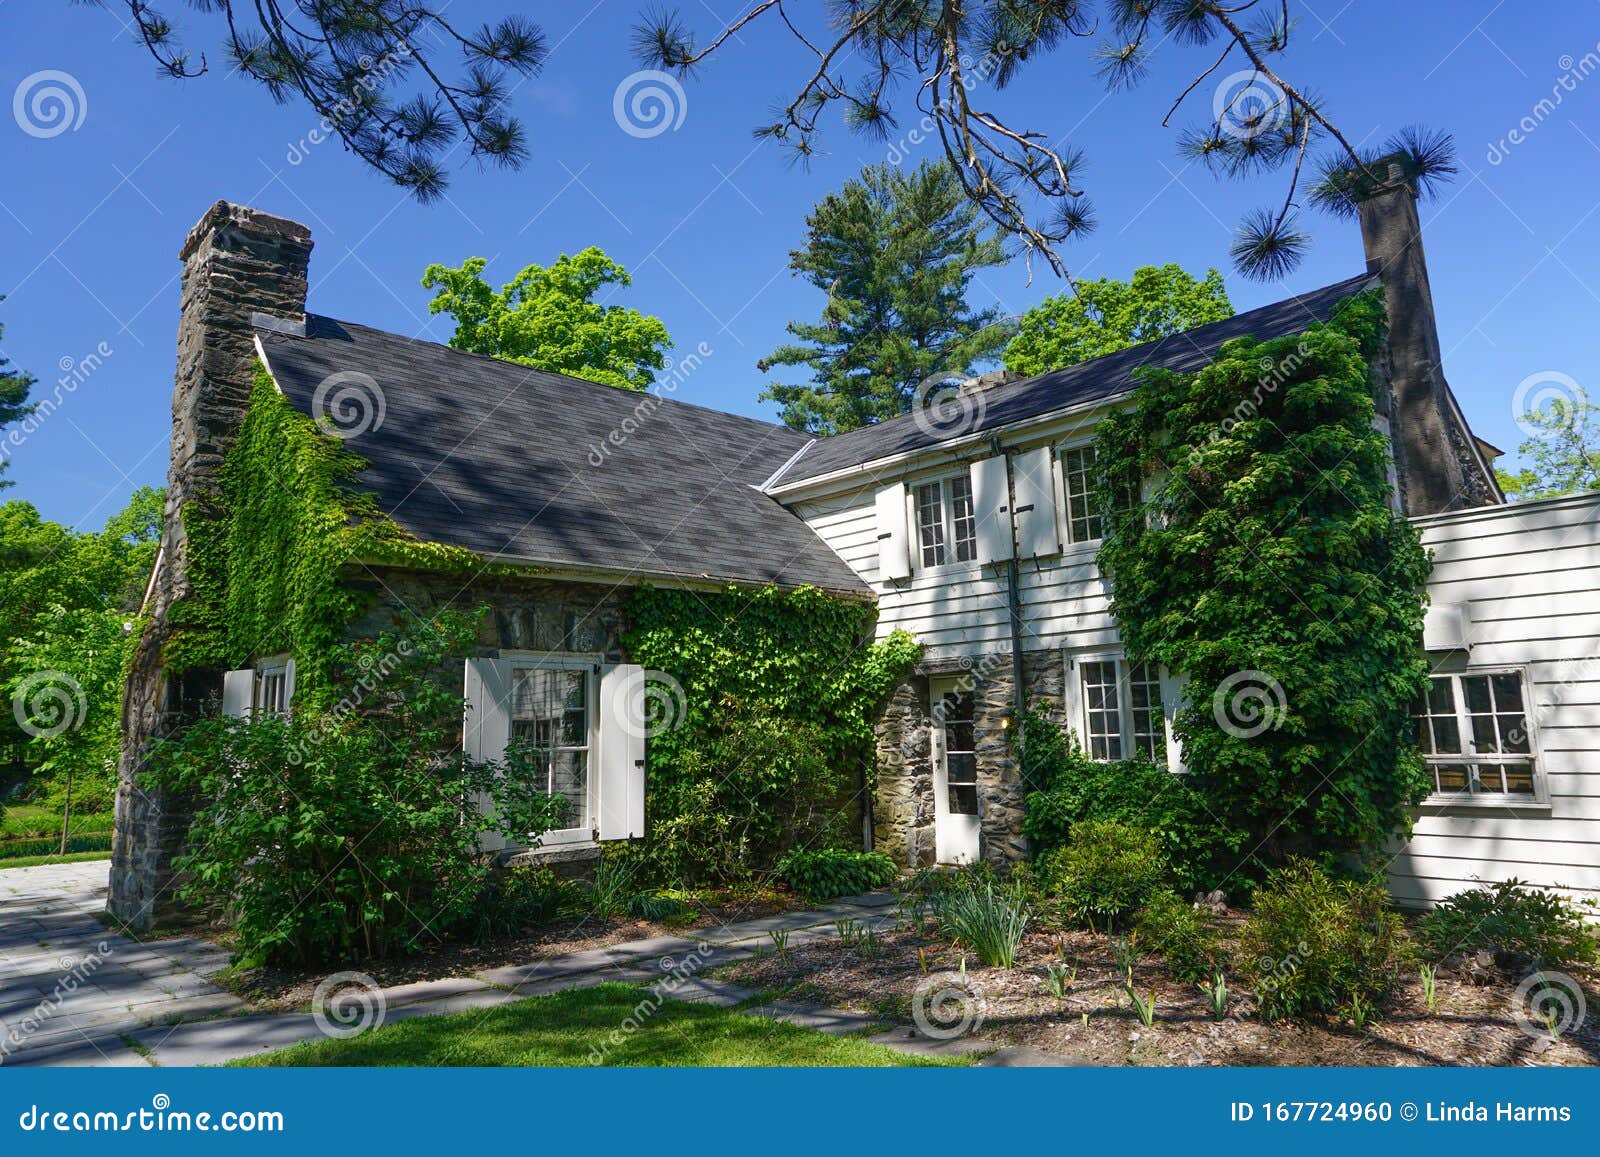 hyde park, new york: the stone cottage at val-kill